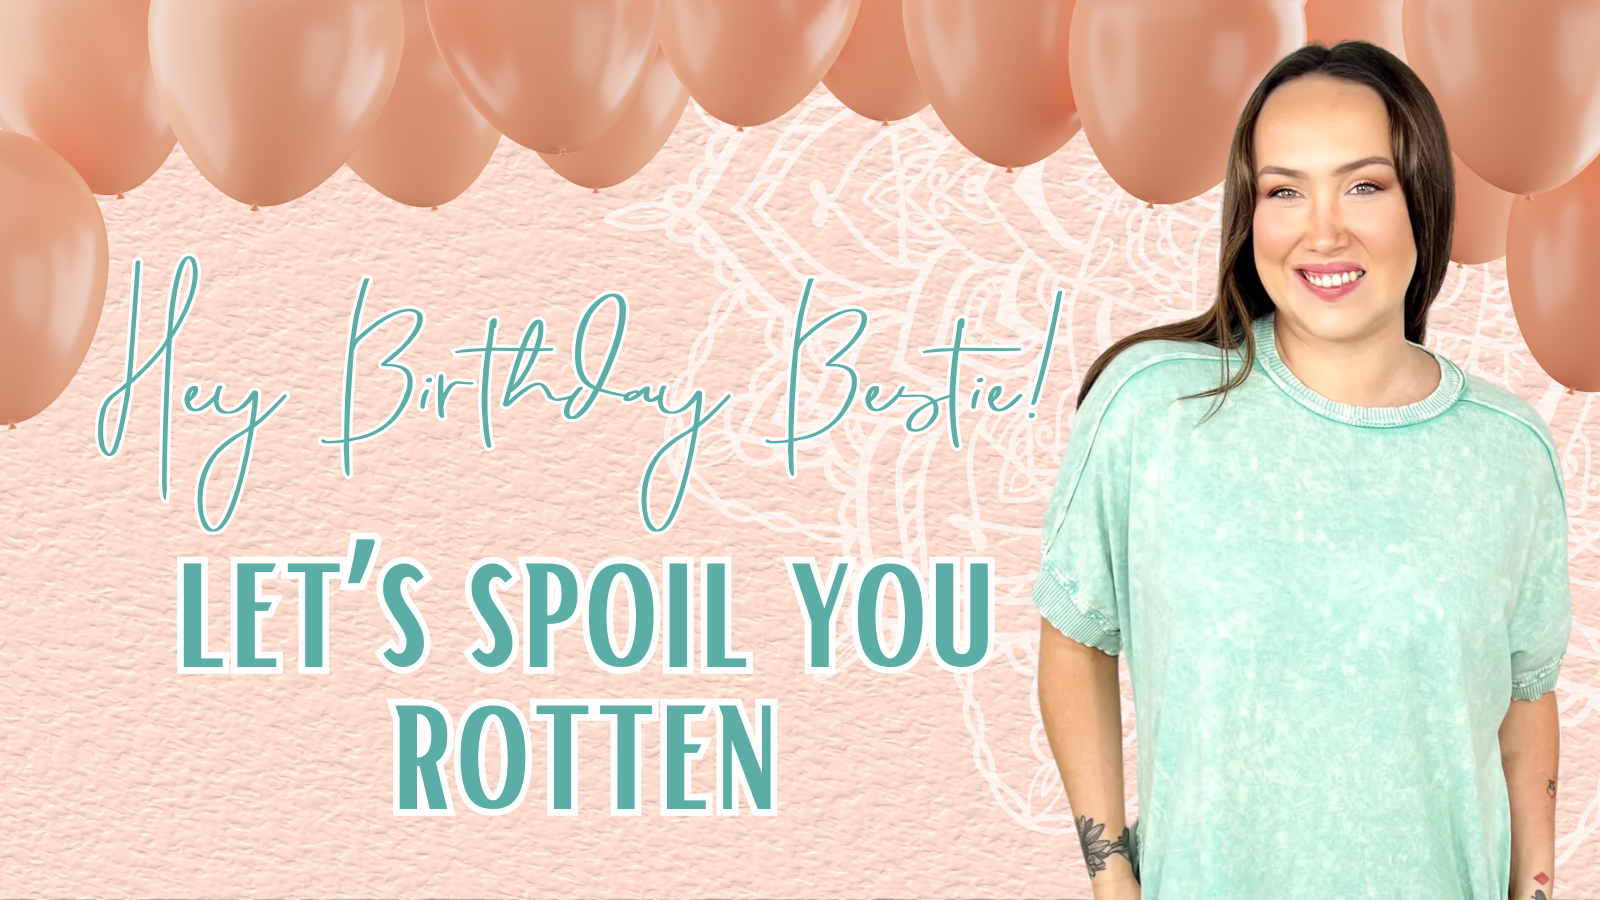 Let us Spoil You | Join Our Birthday Club at Heathered Boho Boutique | Women's Fashion Boutique | Palmetto, FL